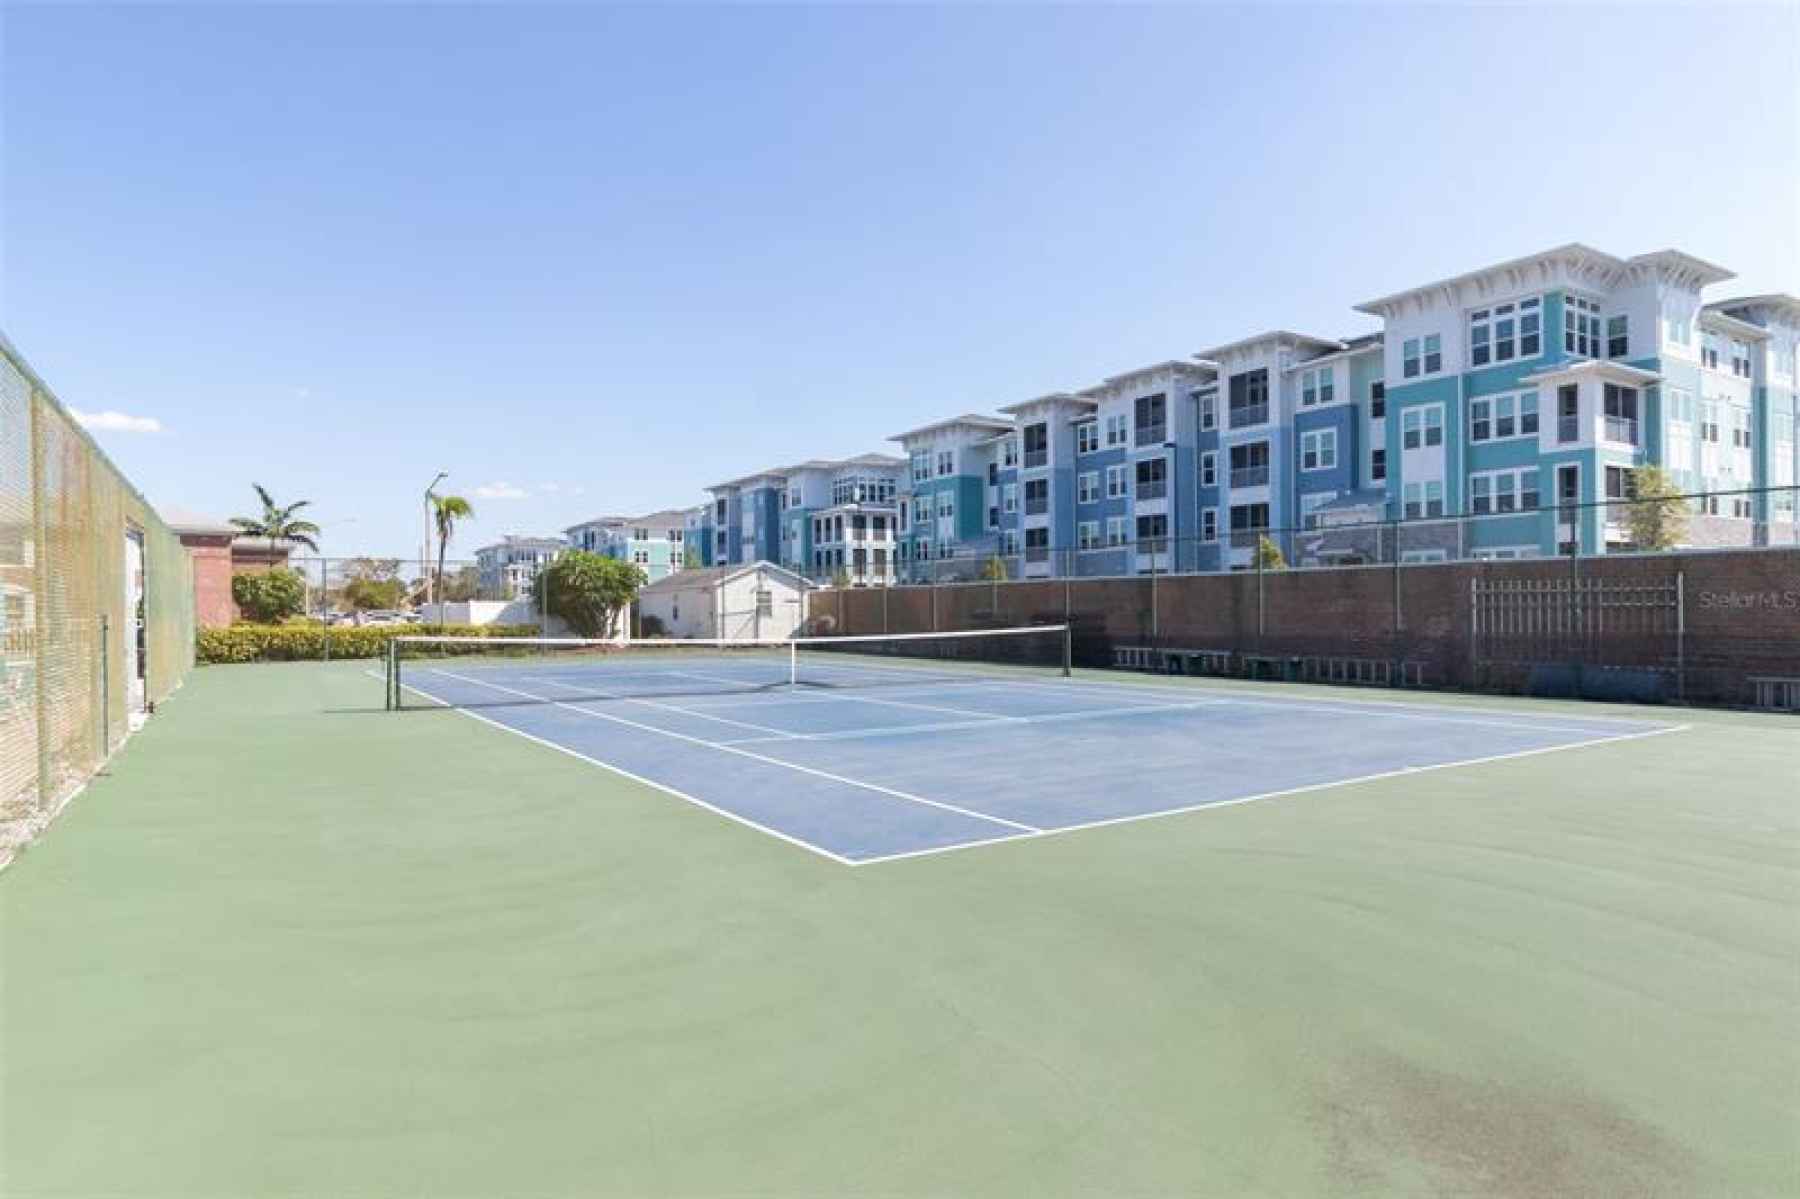 Tennis courts.  New luxury apts in background.